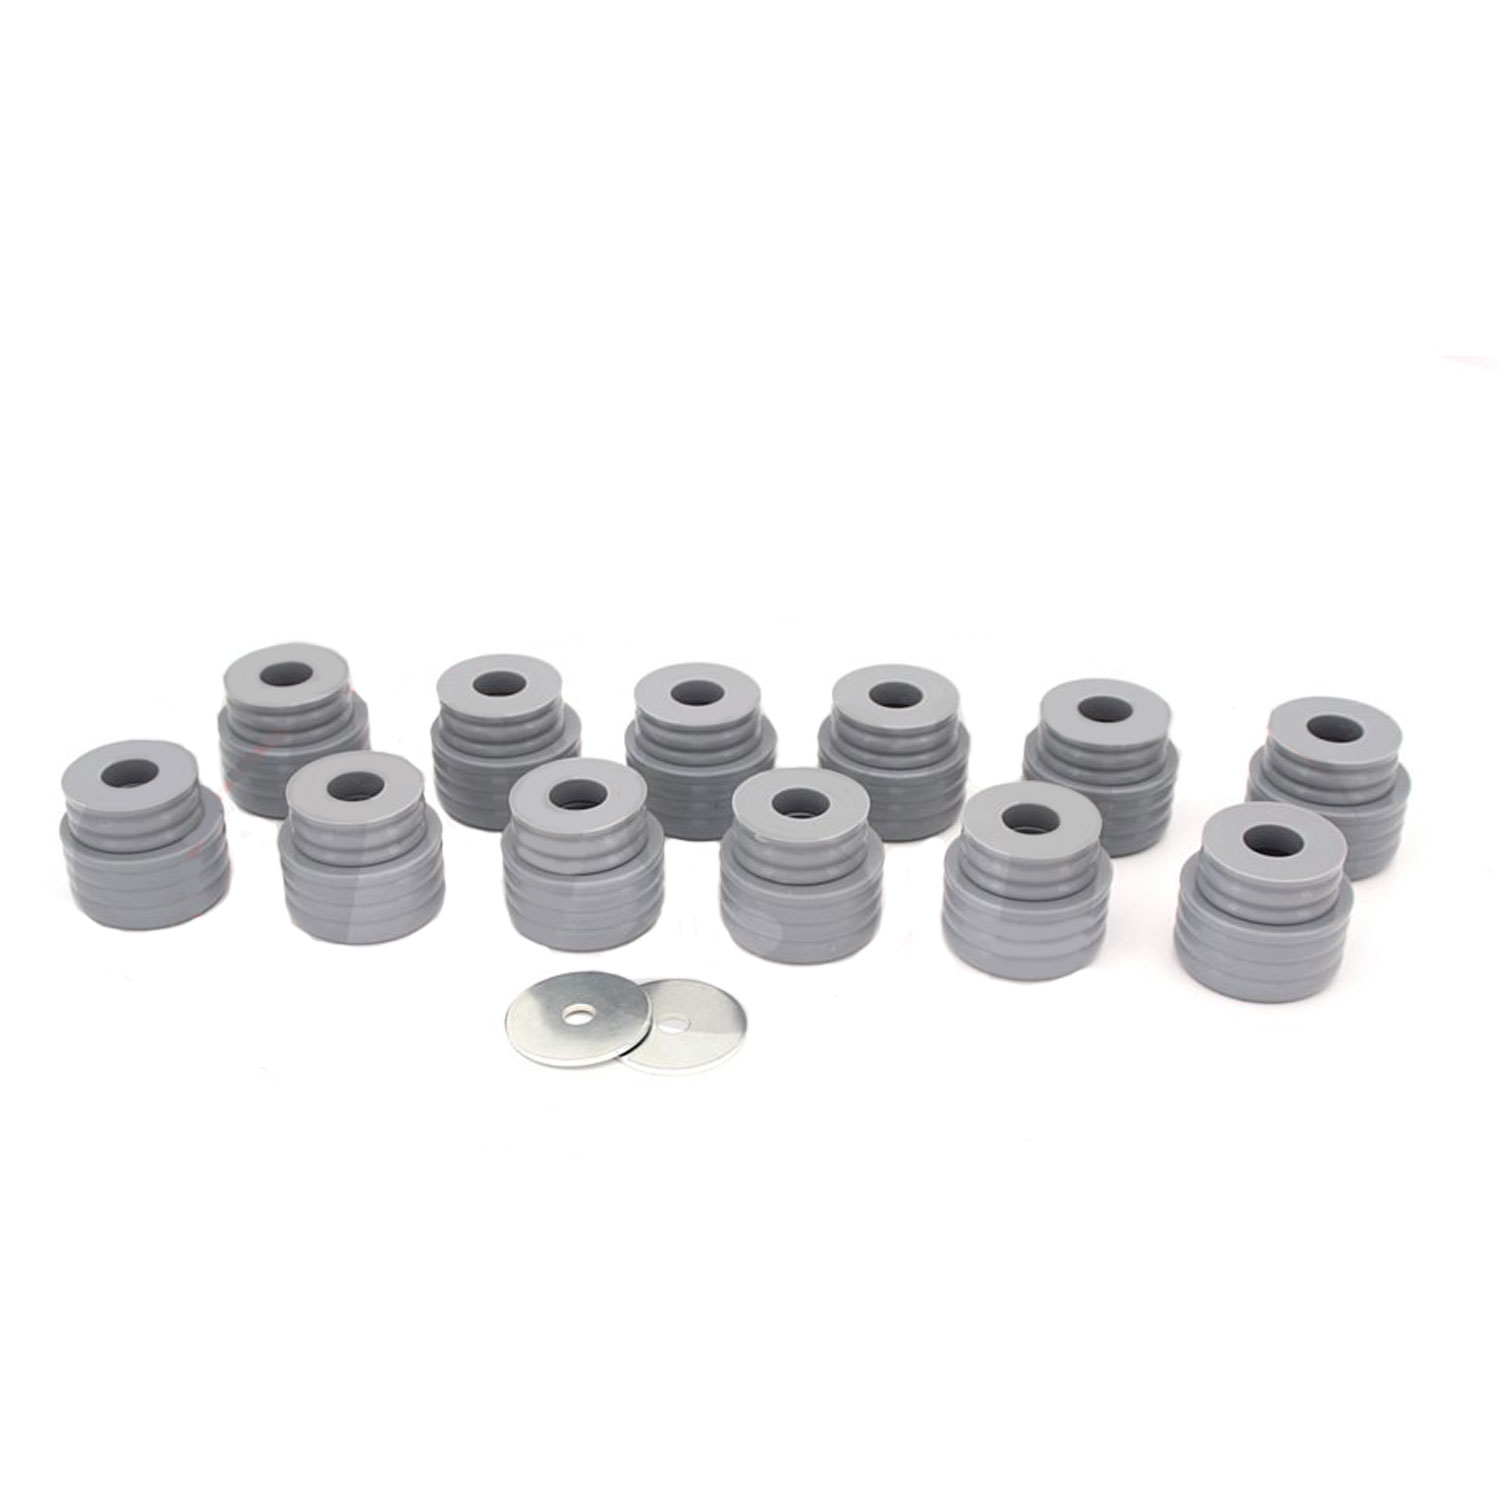 Body Mount Bushings for 1999-2005 Ford Excursion